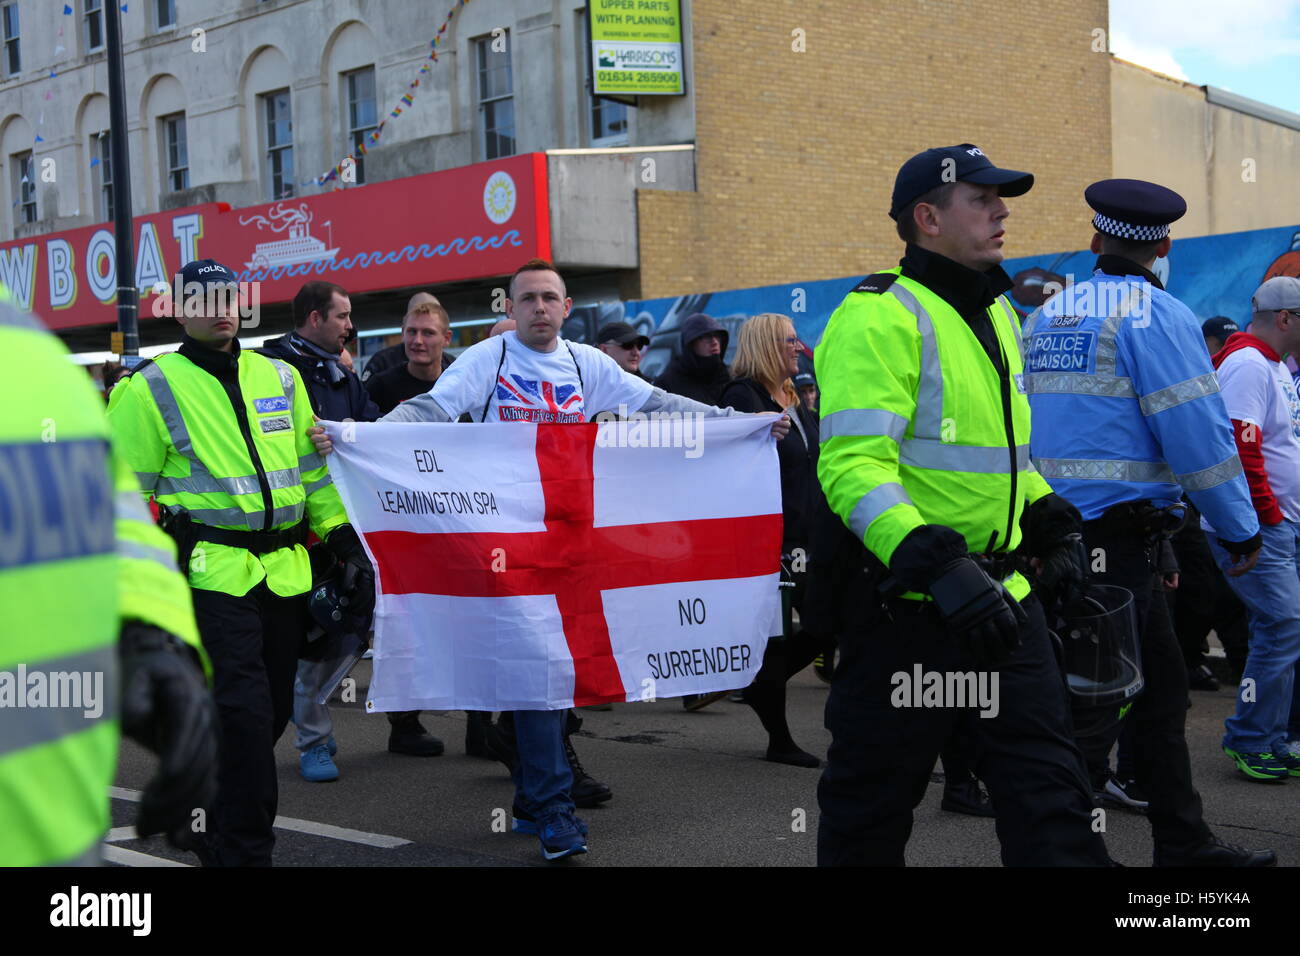 Margate, Kent, UK. 22nd October, 2016. A man with an EDL flag. The right wing group White Lives Matter (WLM) march in the town. This is the first WLM demonstration in the UK. A counter demonstration, Margate Rocks Against Racism (MRAR) is taking place in the town at the same time. Penelope Barritt/Alamy Live News Stock Photo